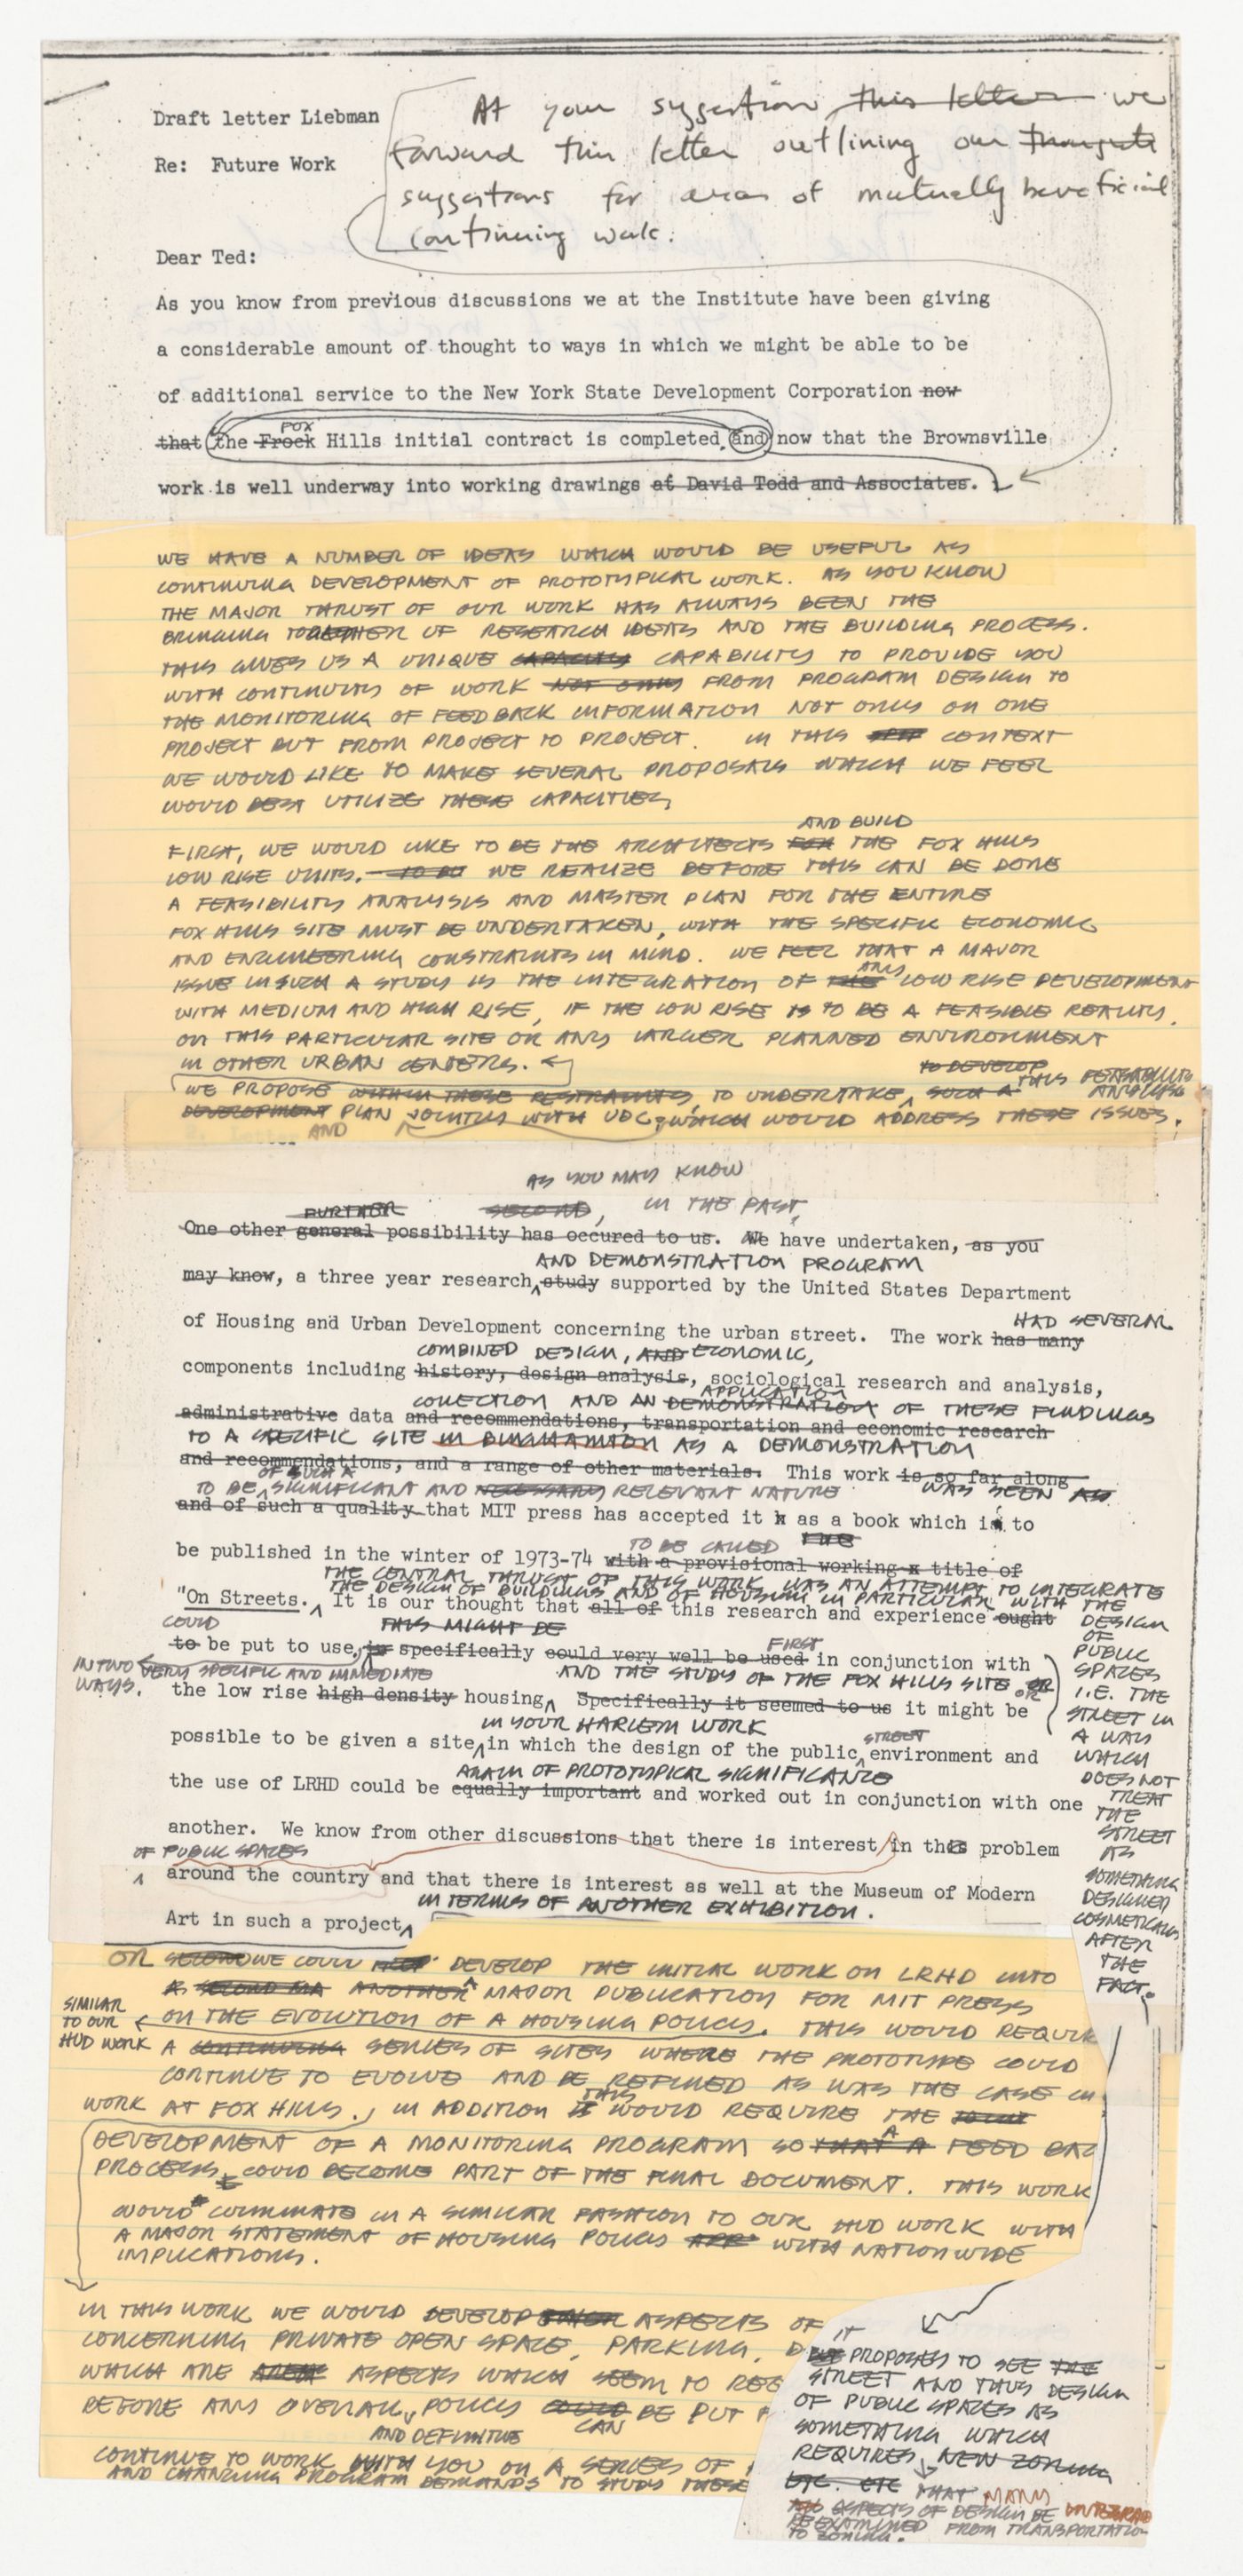 Draft letter from Peter D. Eisenman to Theodore Liebman with annotations by Peter D. Eisenman